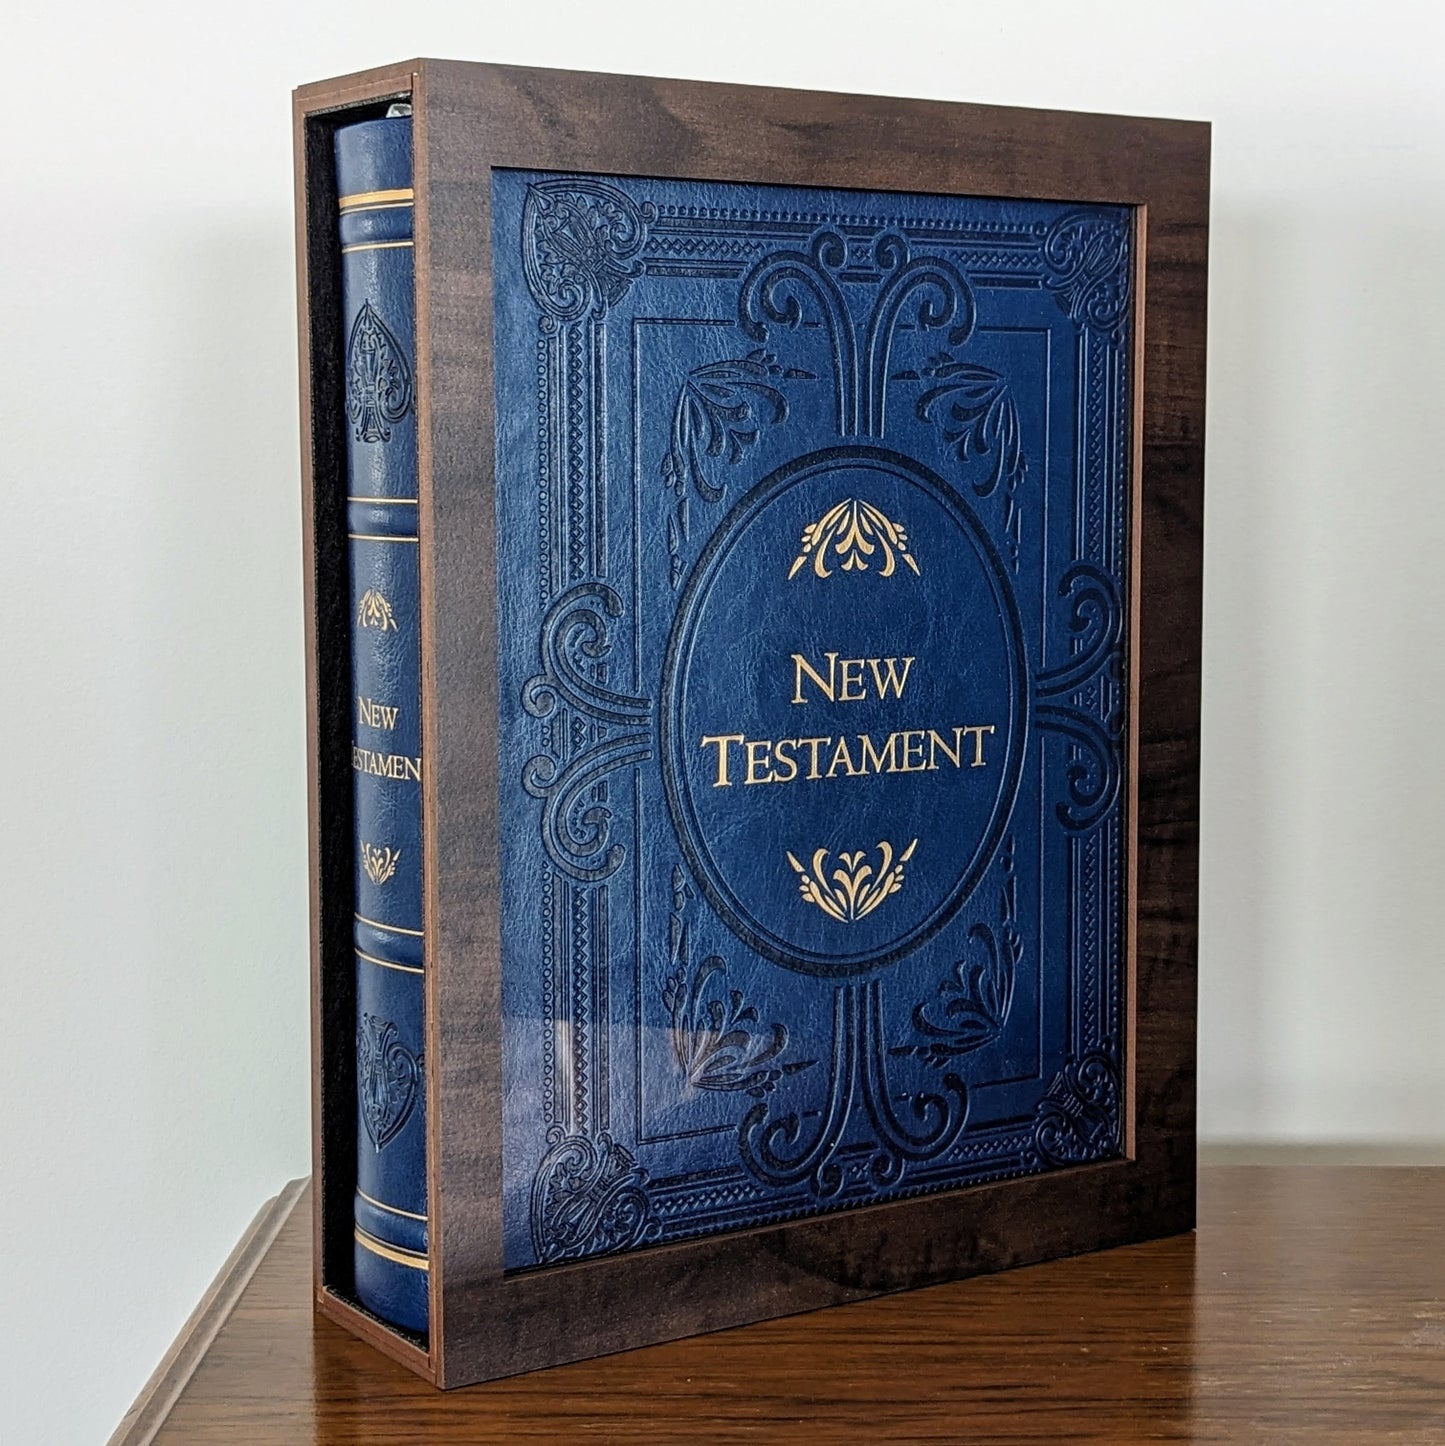 Custom size book display case by Dragon Woodshop featuring the Heirloom New Testament